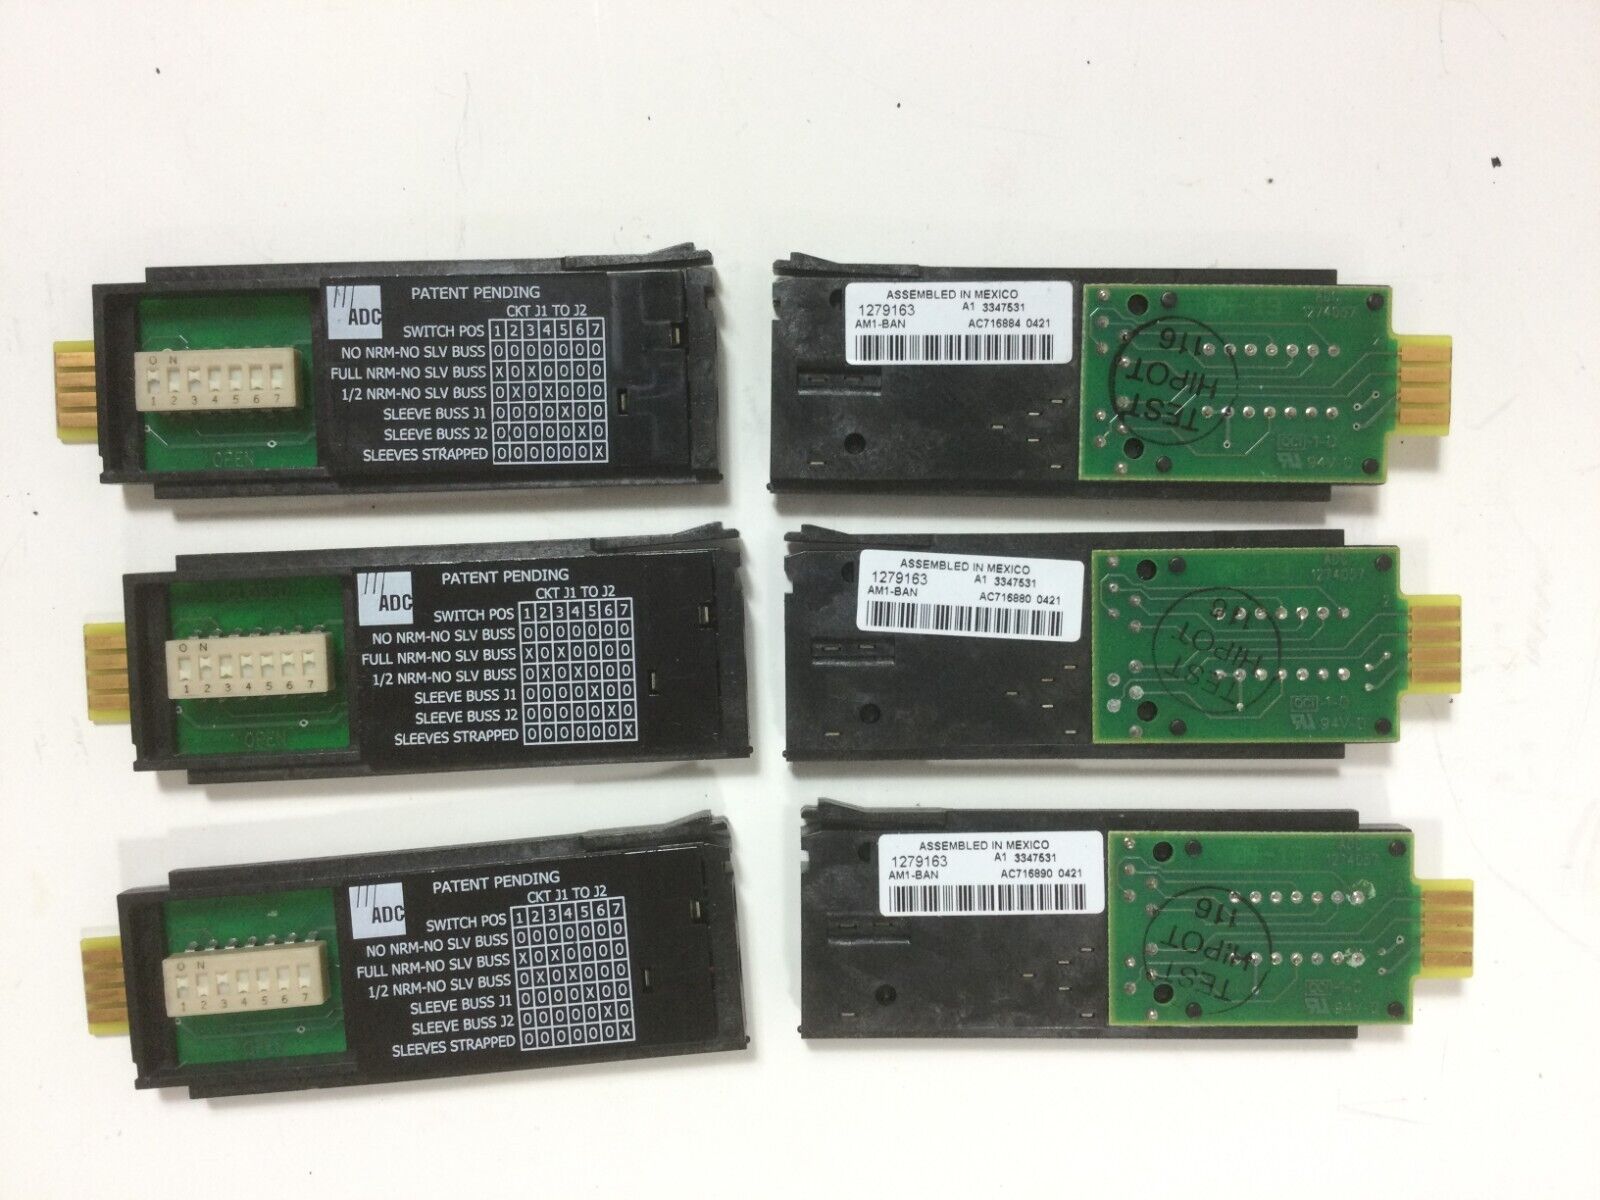 ADC-Commscope AM1-BAN Programable Audio Jack Card - Lot of 6